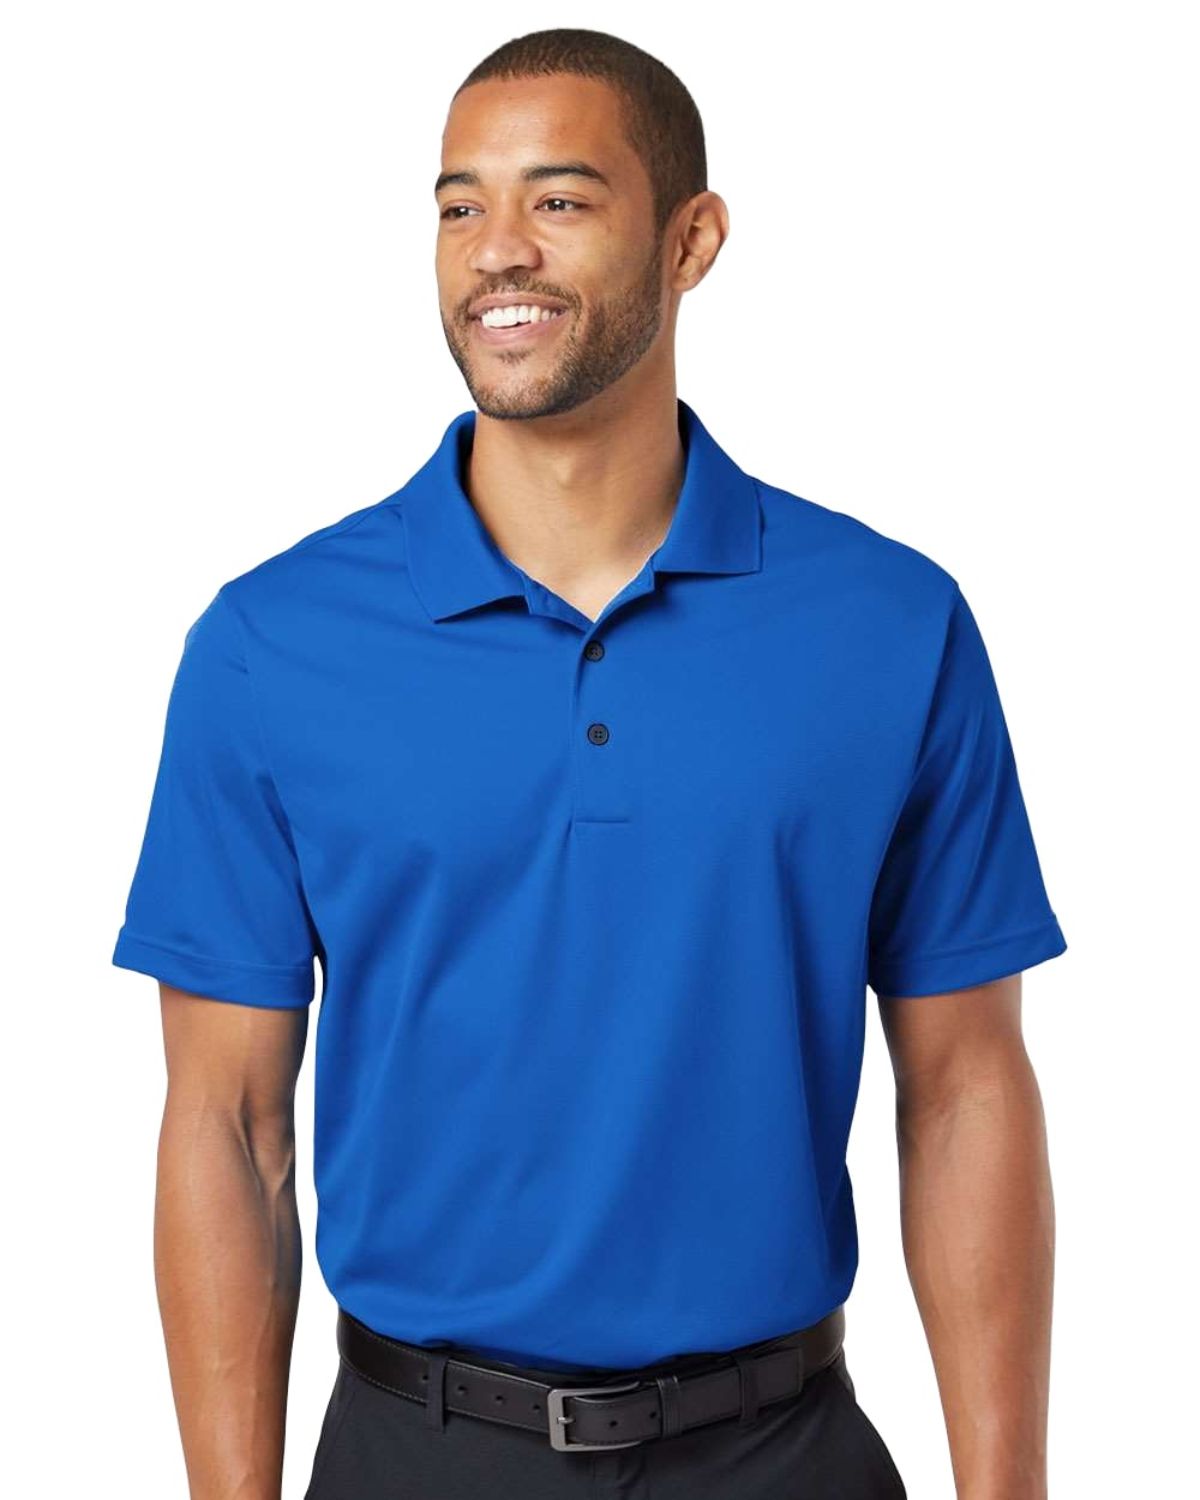 Size Chart for Adidas Golf A130 Basic Polo - A2ZClothing.com